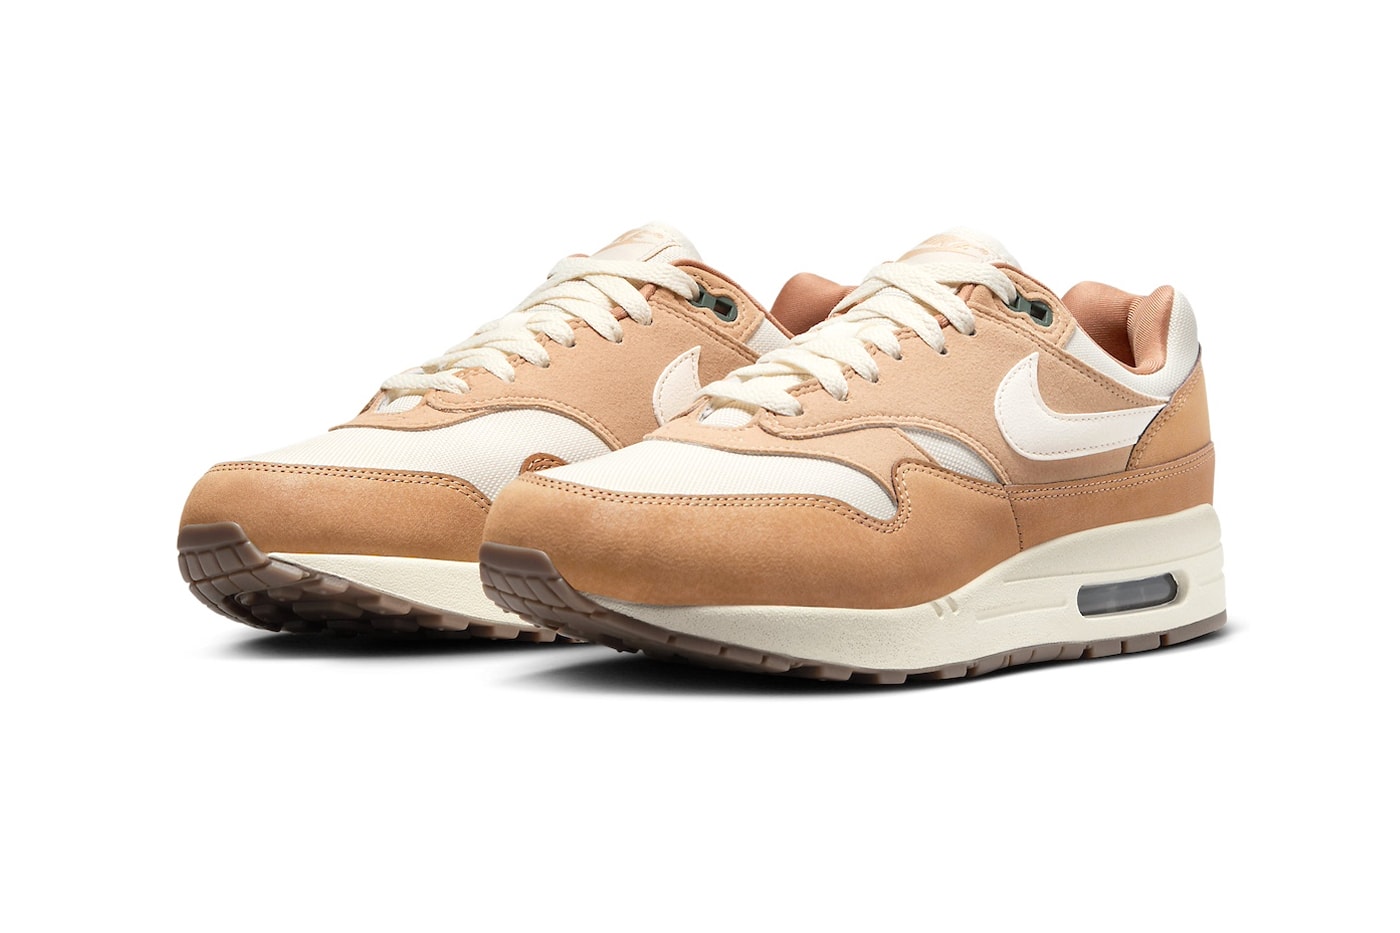 Official Look at the Nike Air Max 1 "Wheat" FZ3598-299 White/Wheat-Flax-Outdoor Green-Gum Medium Brown spring 2024 swoosh classic sneaker